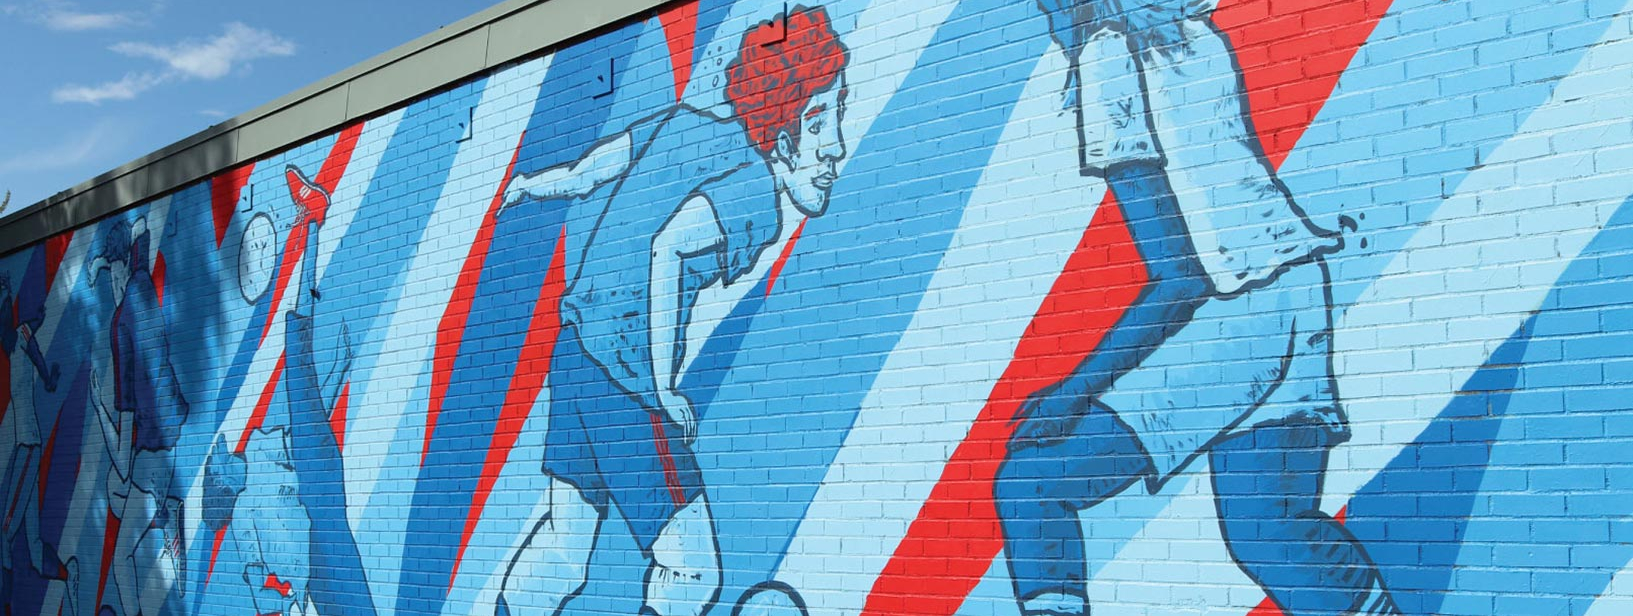 Mural of kids playing